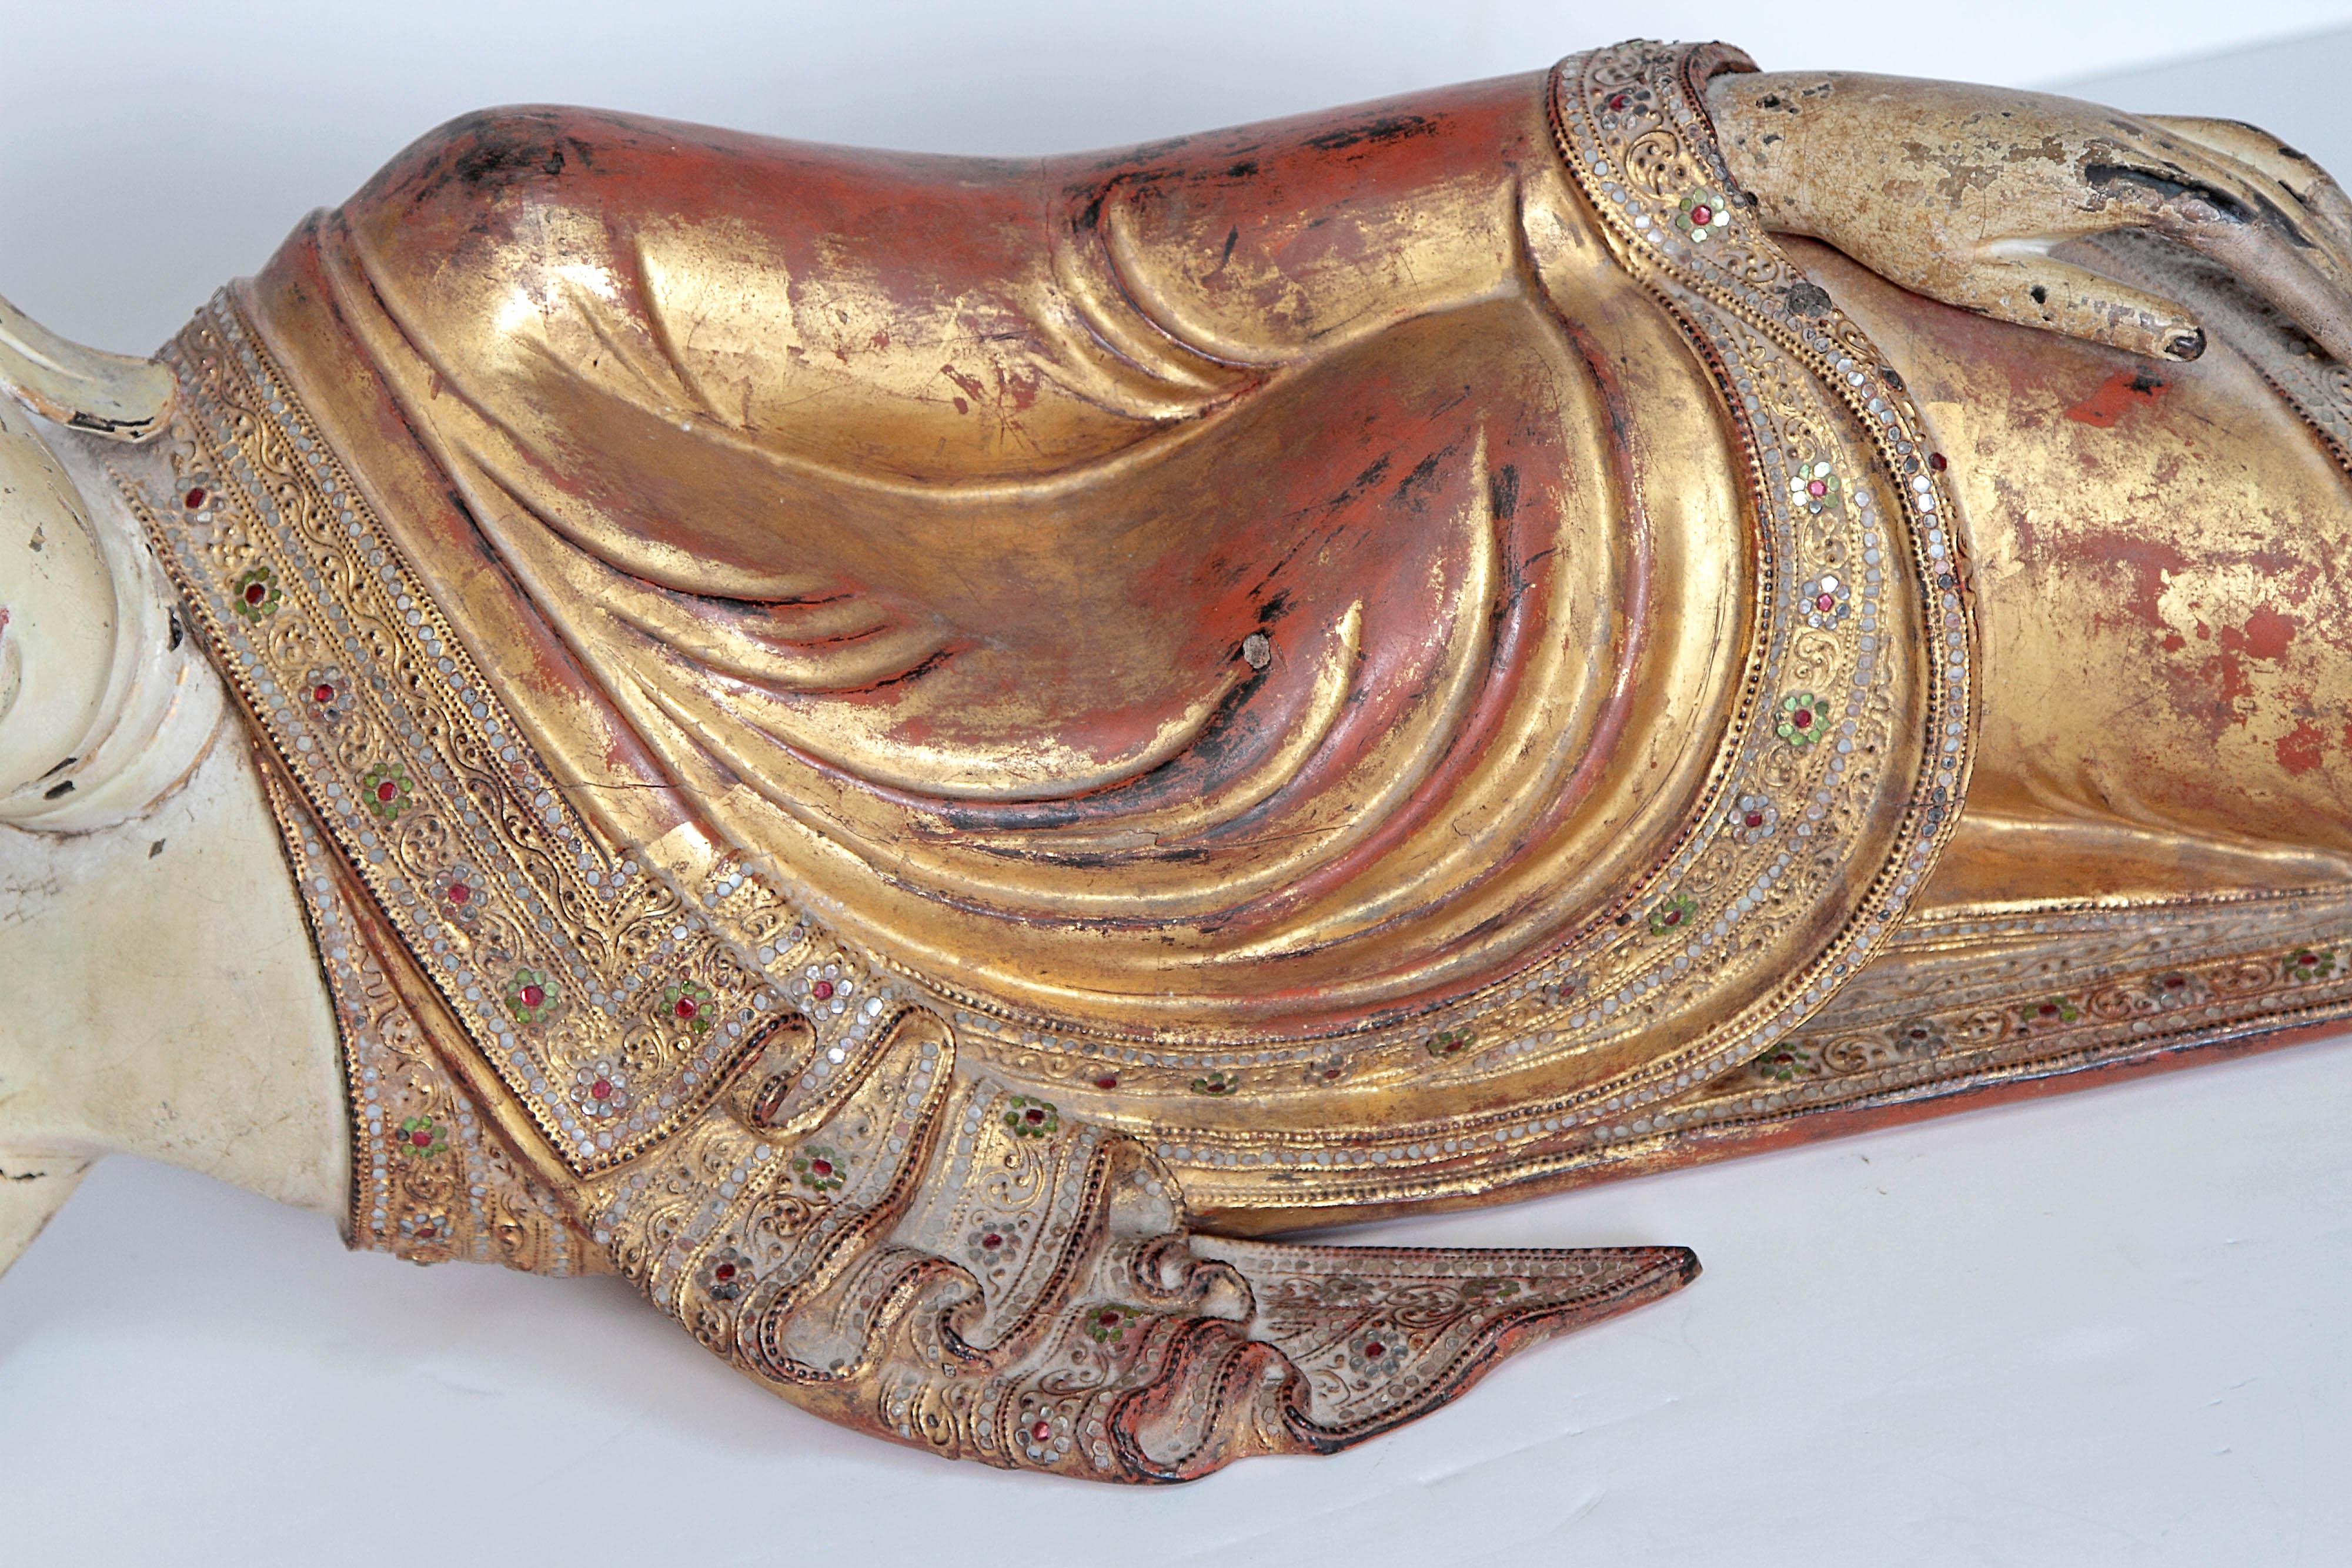 Carved Reclining Buddha or Draped in Golden Robes with a Jeweled Border and Headress